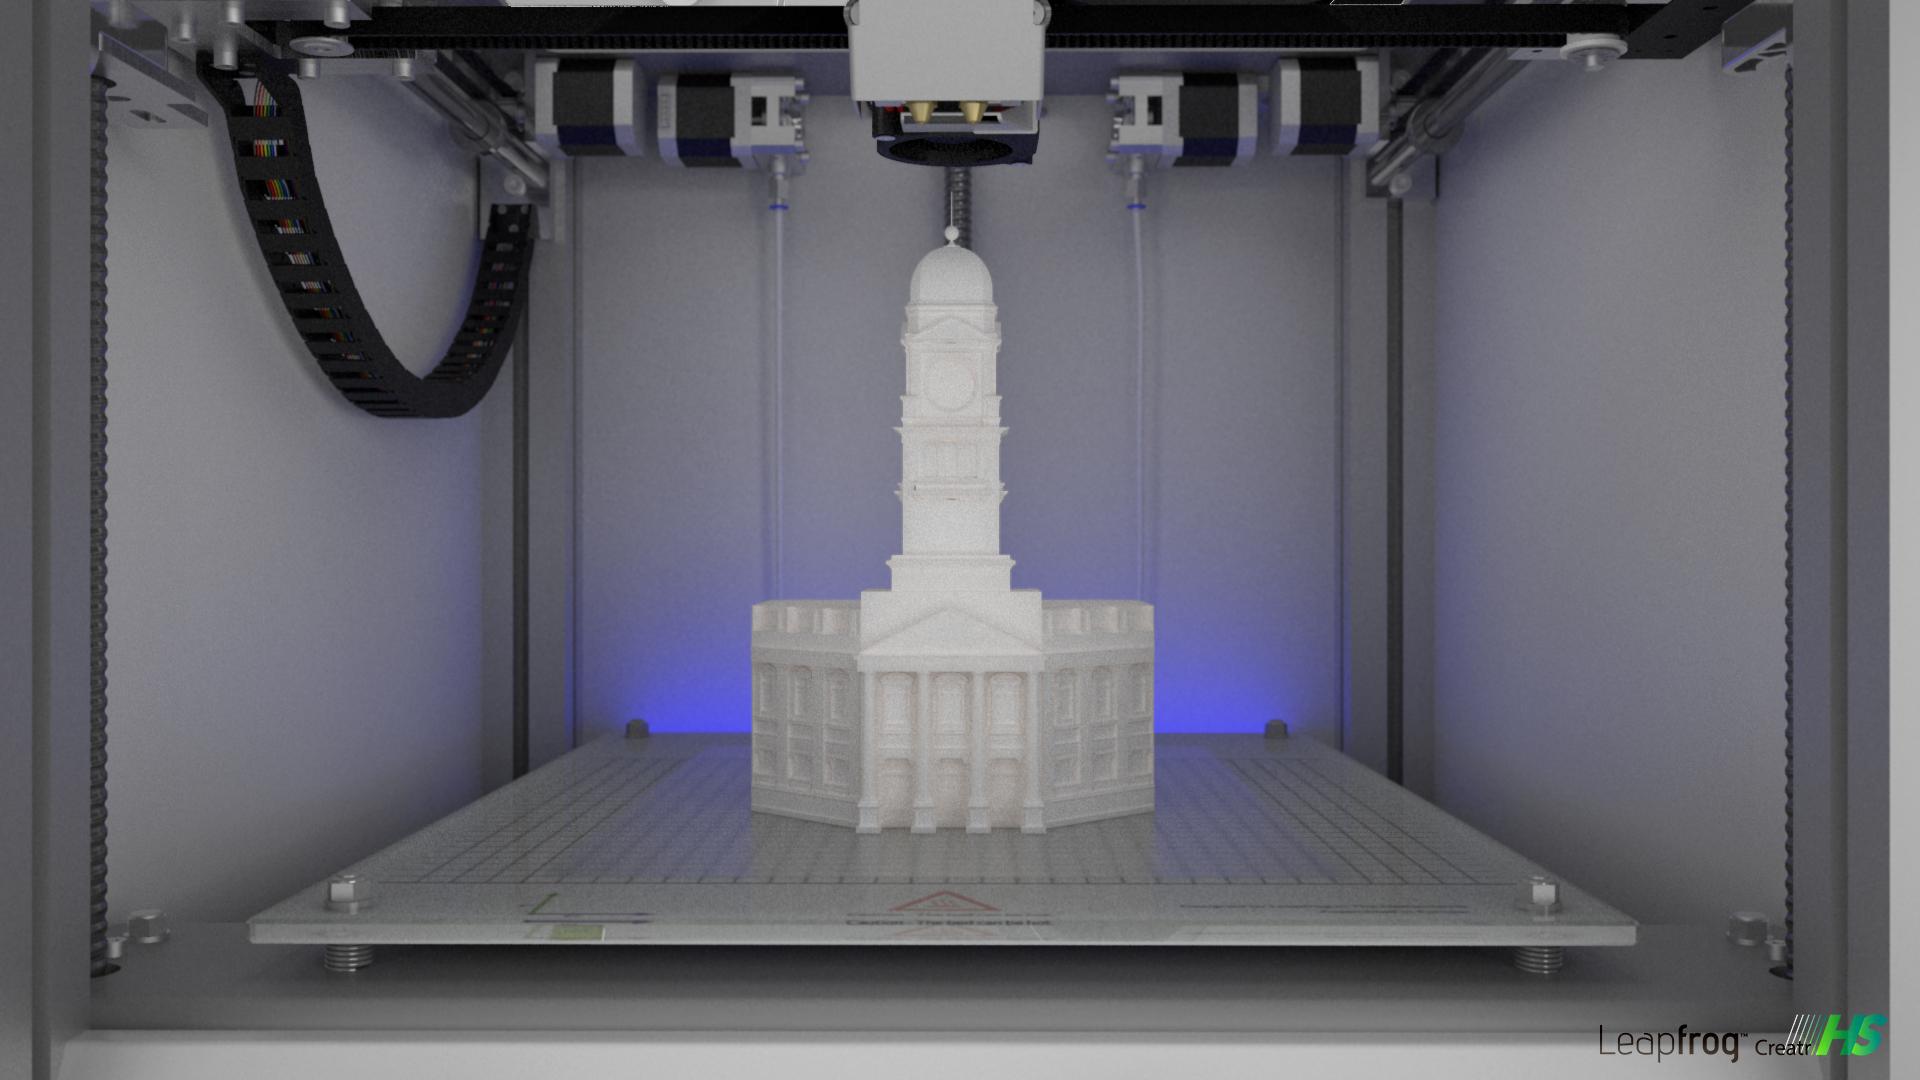 The best 3D printer for Architects